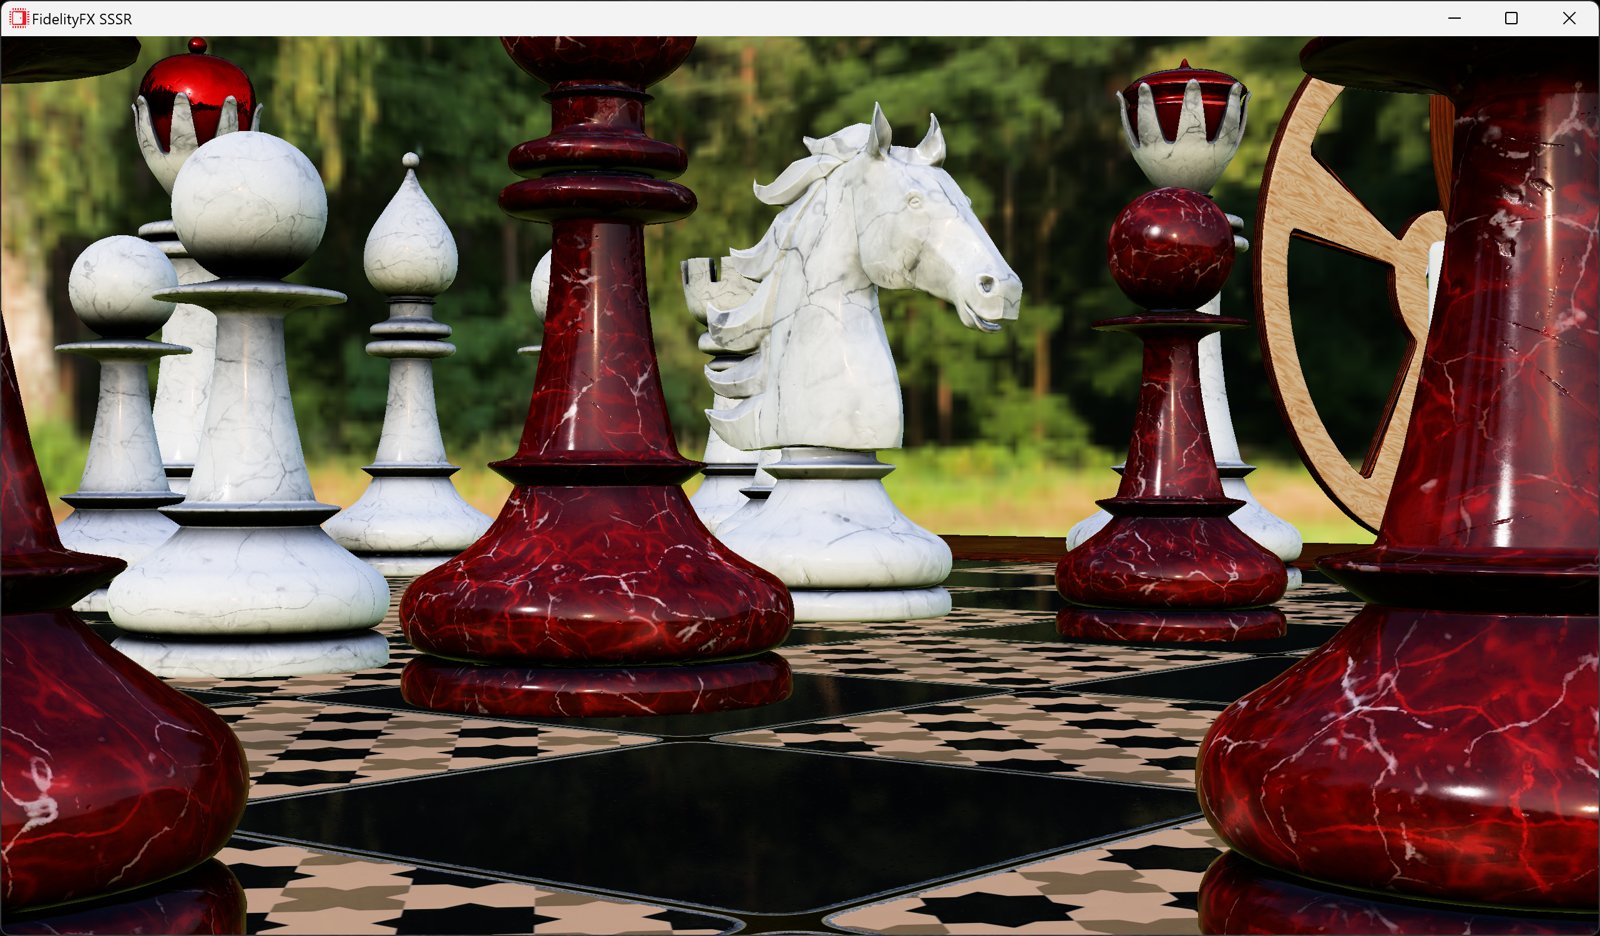 Chess pieces without SS reflections